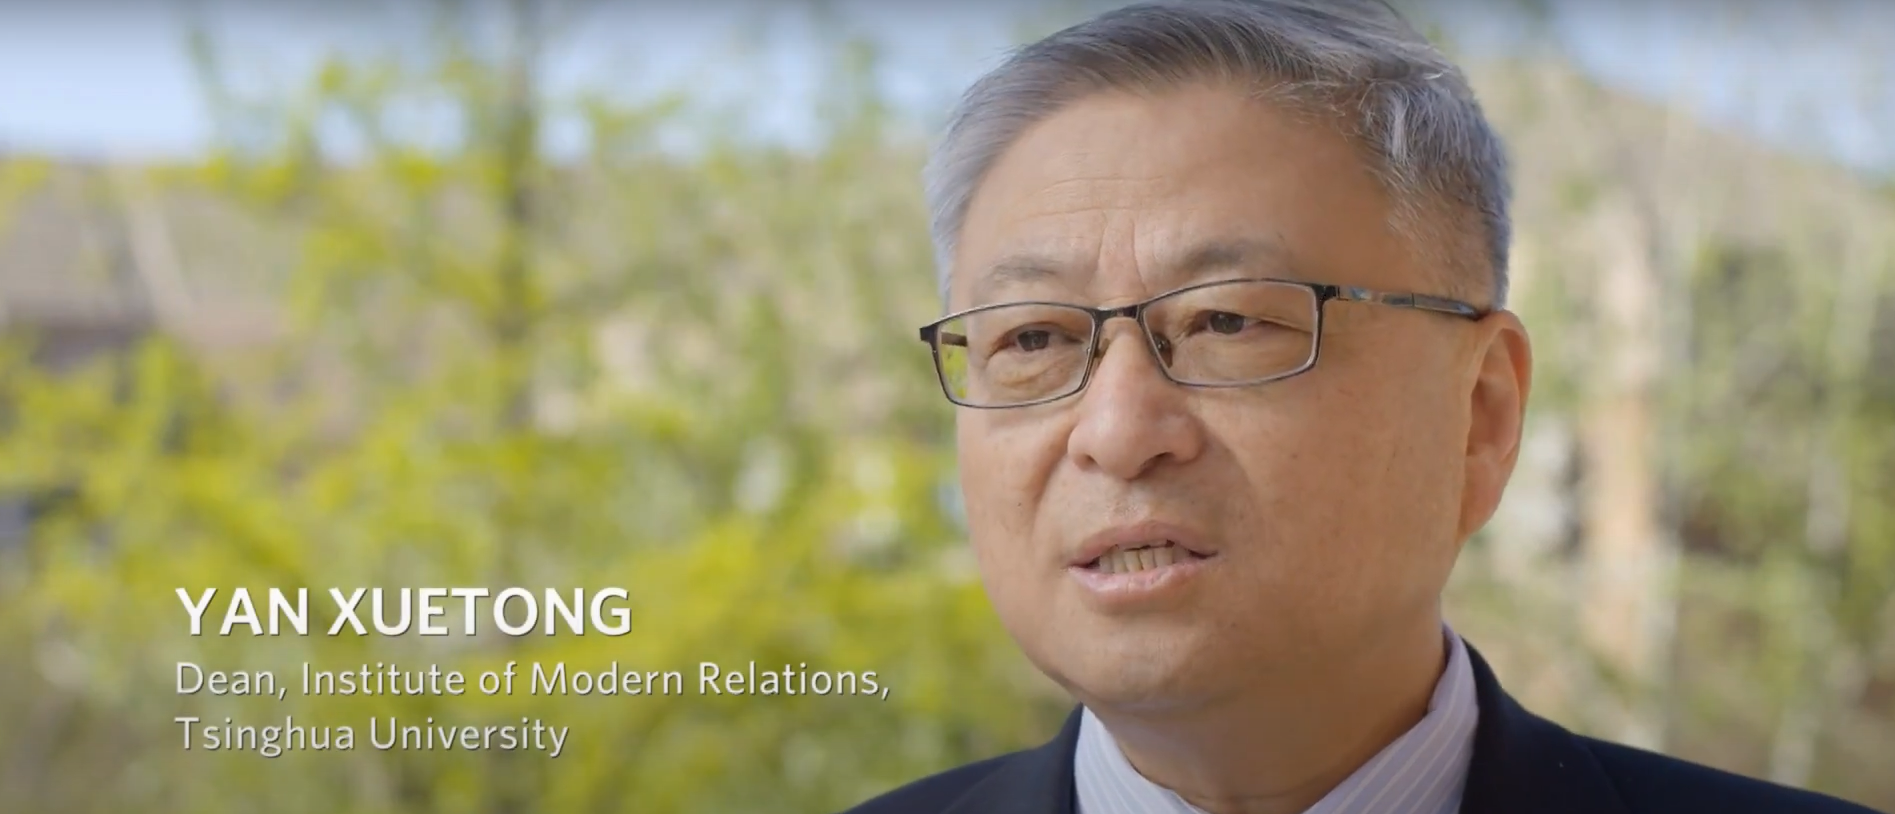 Yan Xuetong is one of the original experts at Carnegie-Tsinghua and is also a member of the CCP, although his Carnegie profile neglects to mention this association.[YouTube/Screenshot/Carnegie-TsinghuaCenter]